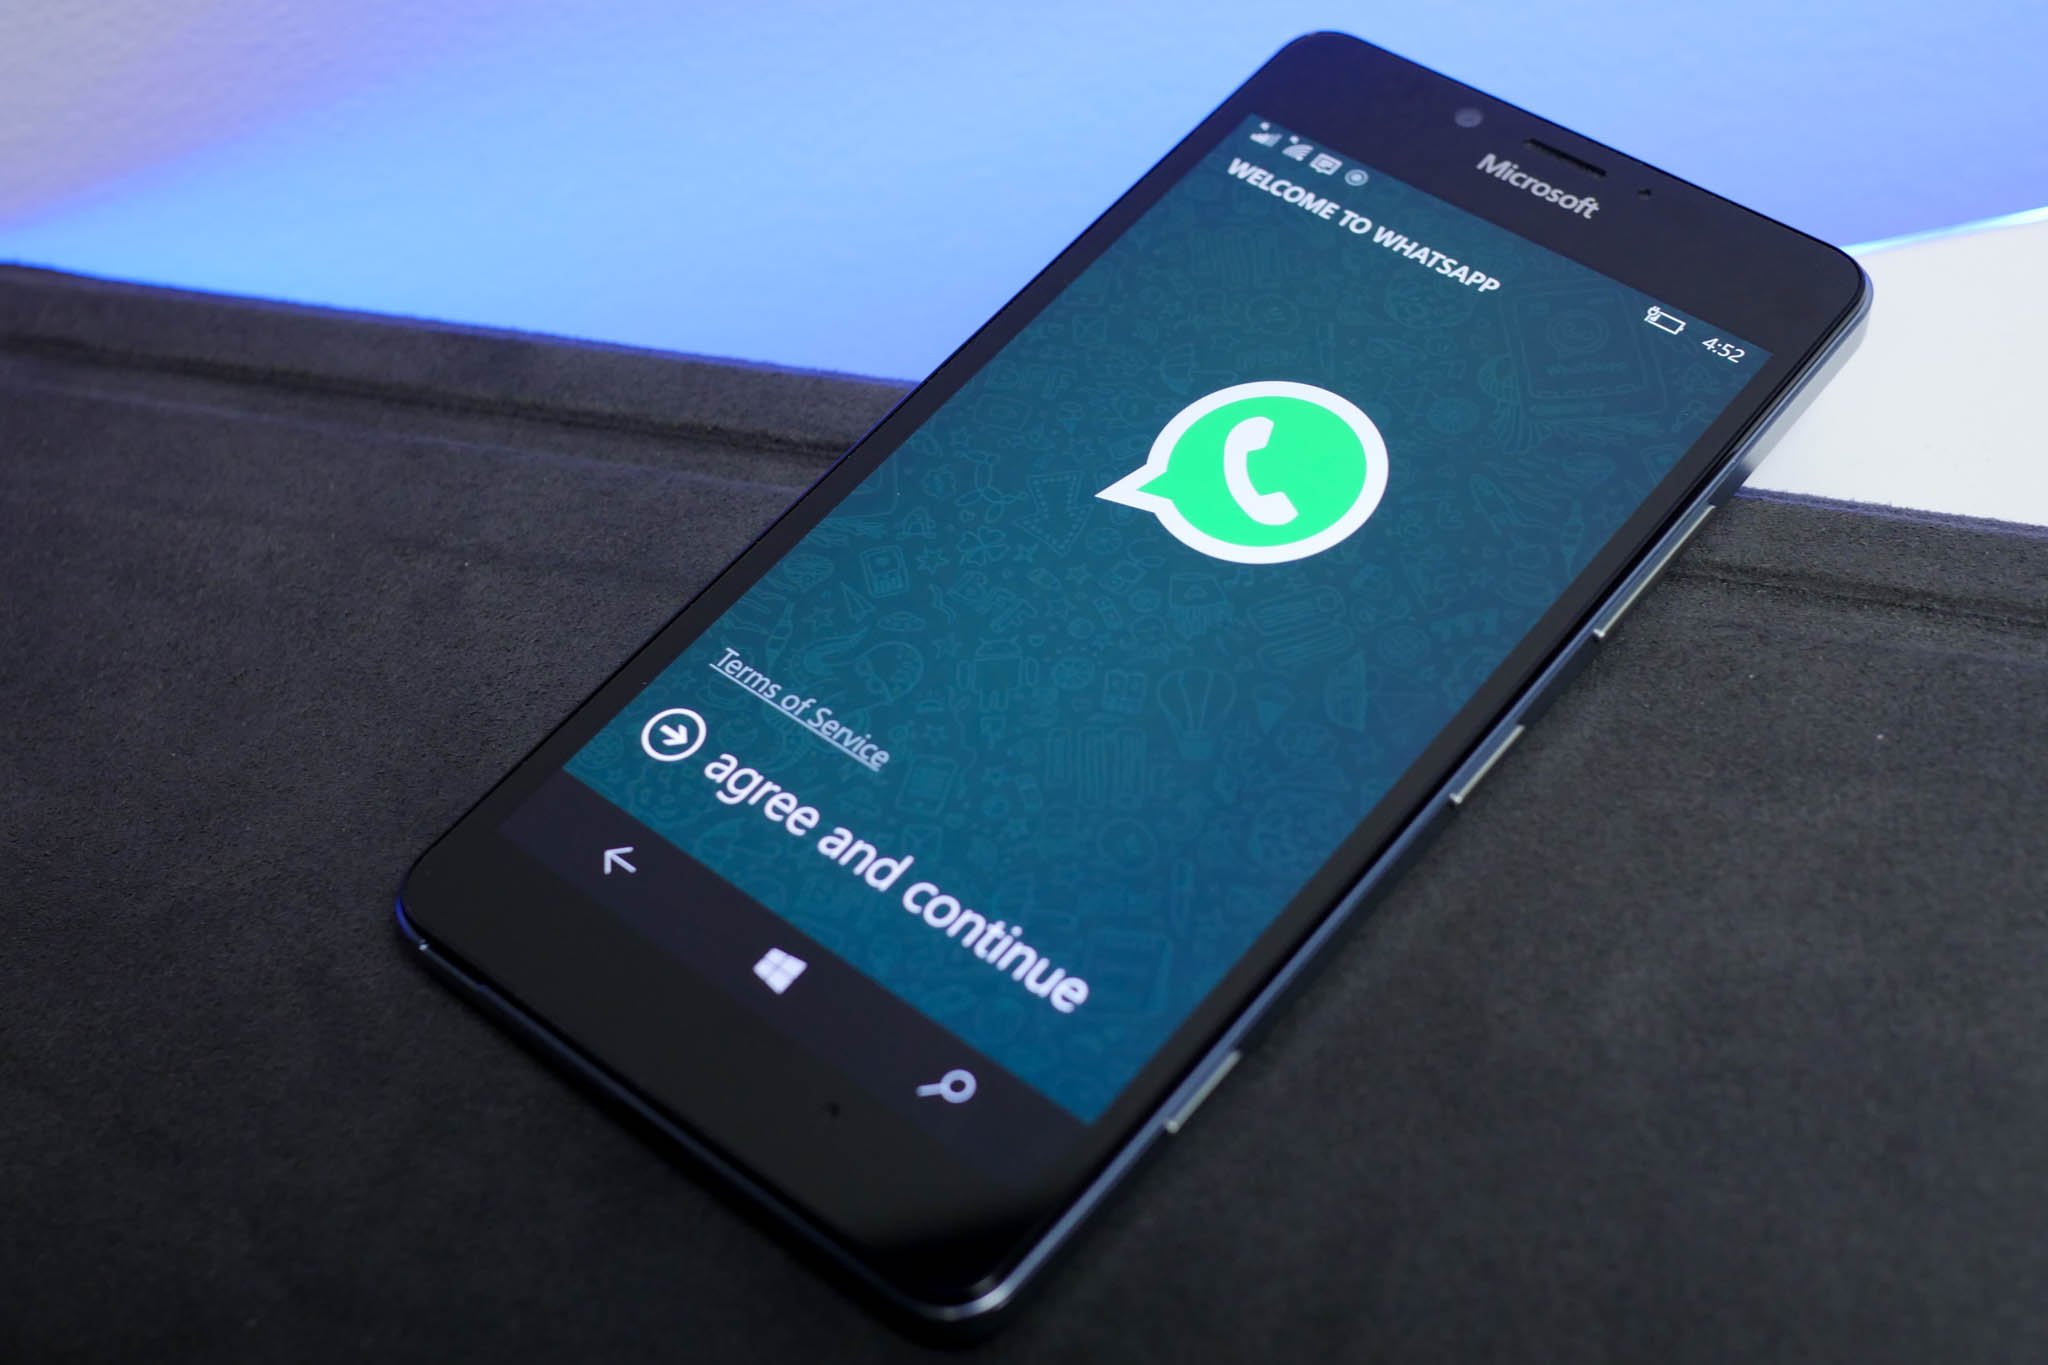 How To Make And Receive Calls Using Whatsapp On A Windows 10 Mobile